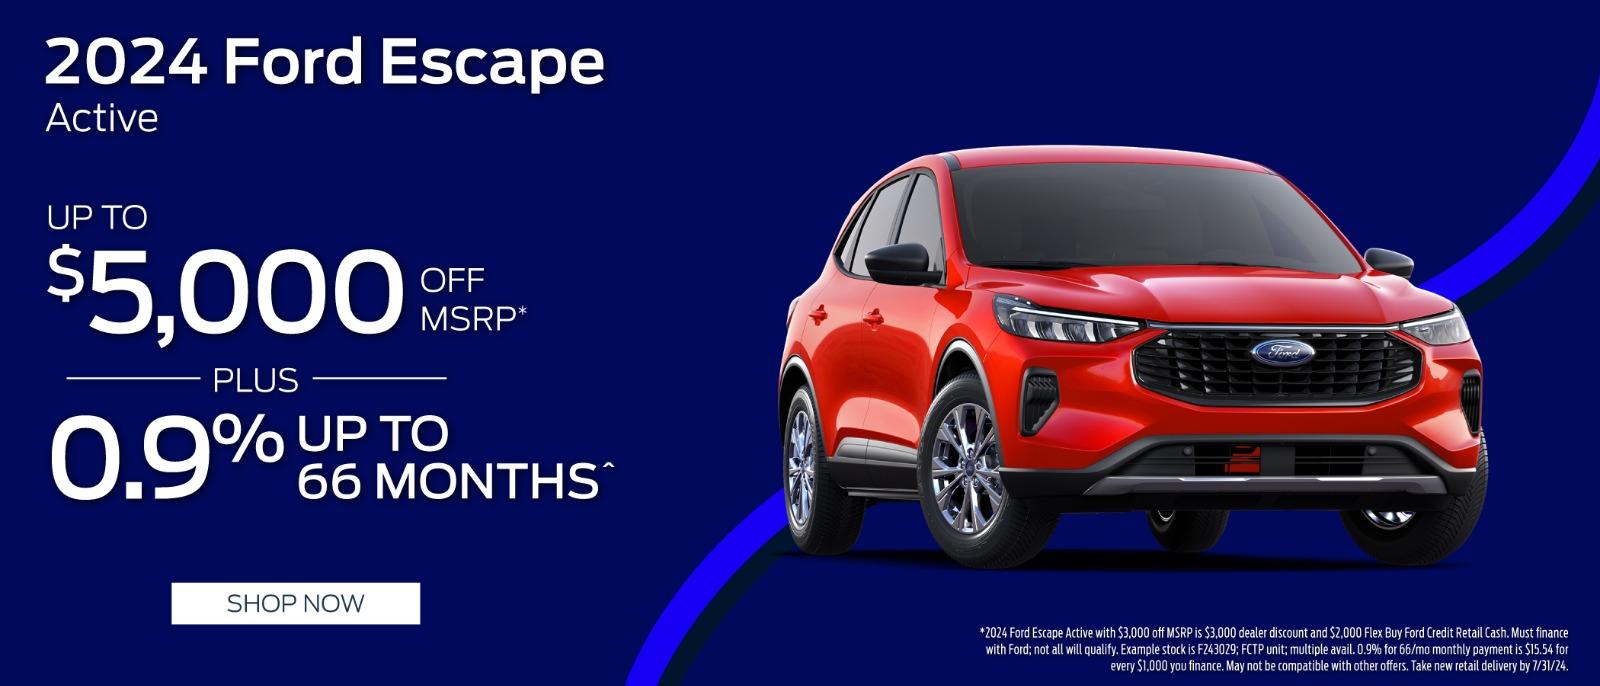 2024 Ford Escape up to $5,000 off Msrp